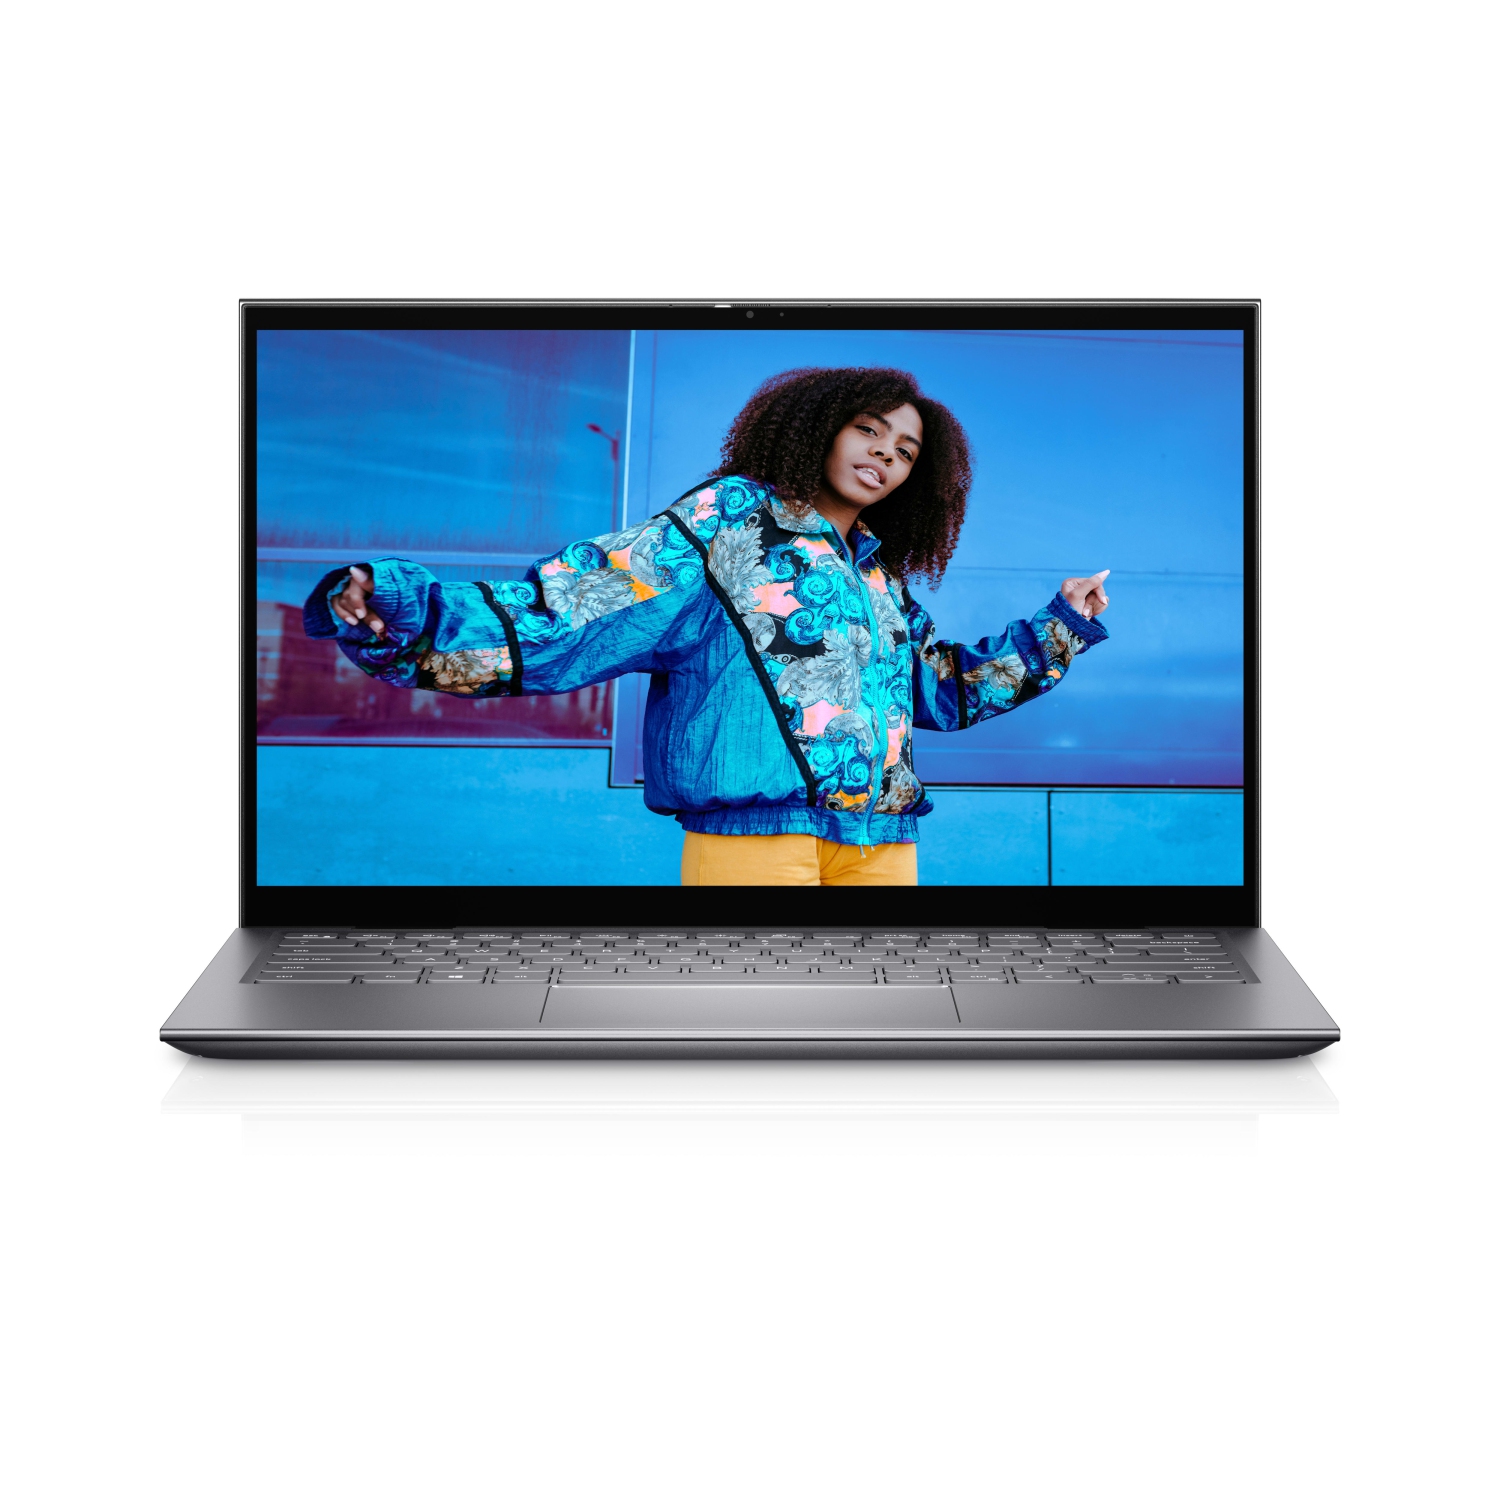 Refurbished (Excellent) – Dell Inspiron 5410 2-in-1 (2021) | 14" FHD Touch | Core i5 - 1TB SSD - 32GB RAM | 4 Cores @ 4.5 GHz - 11th Gen CPU